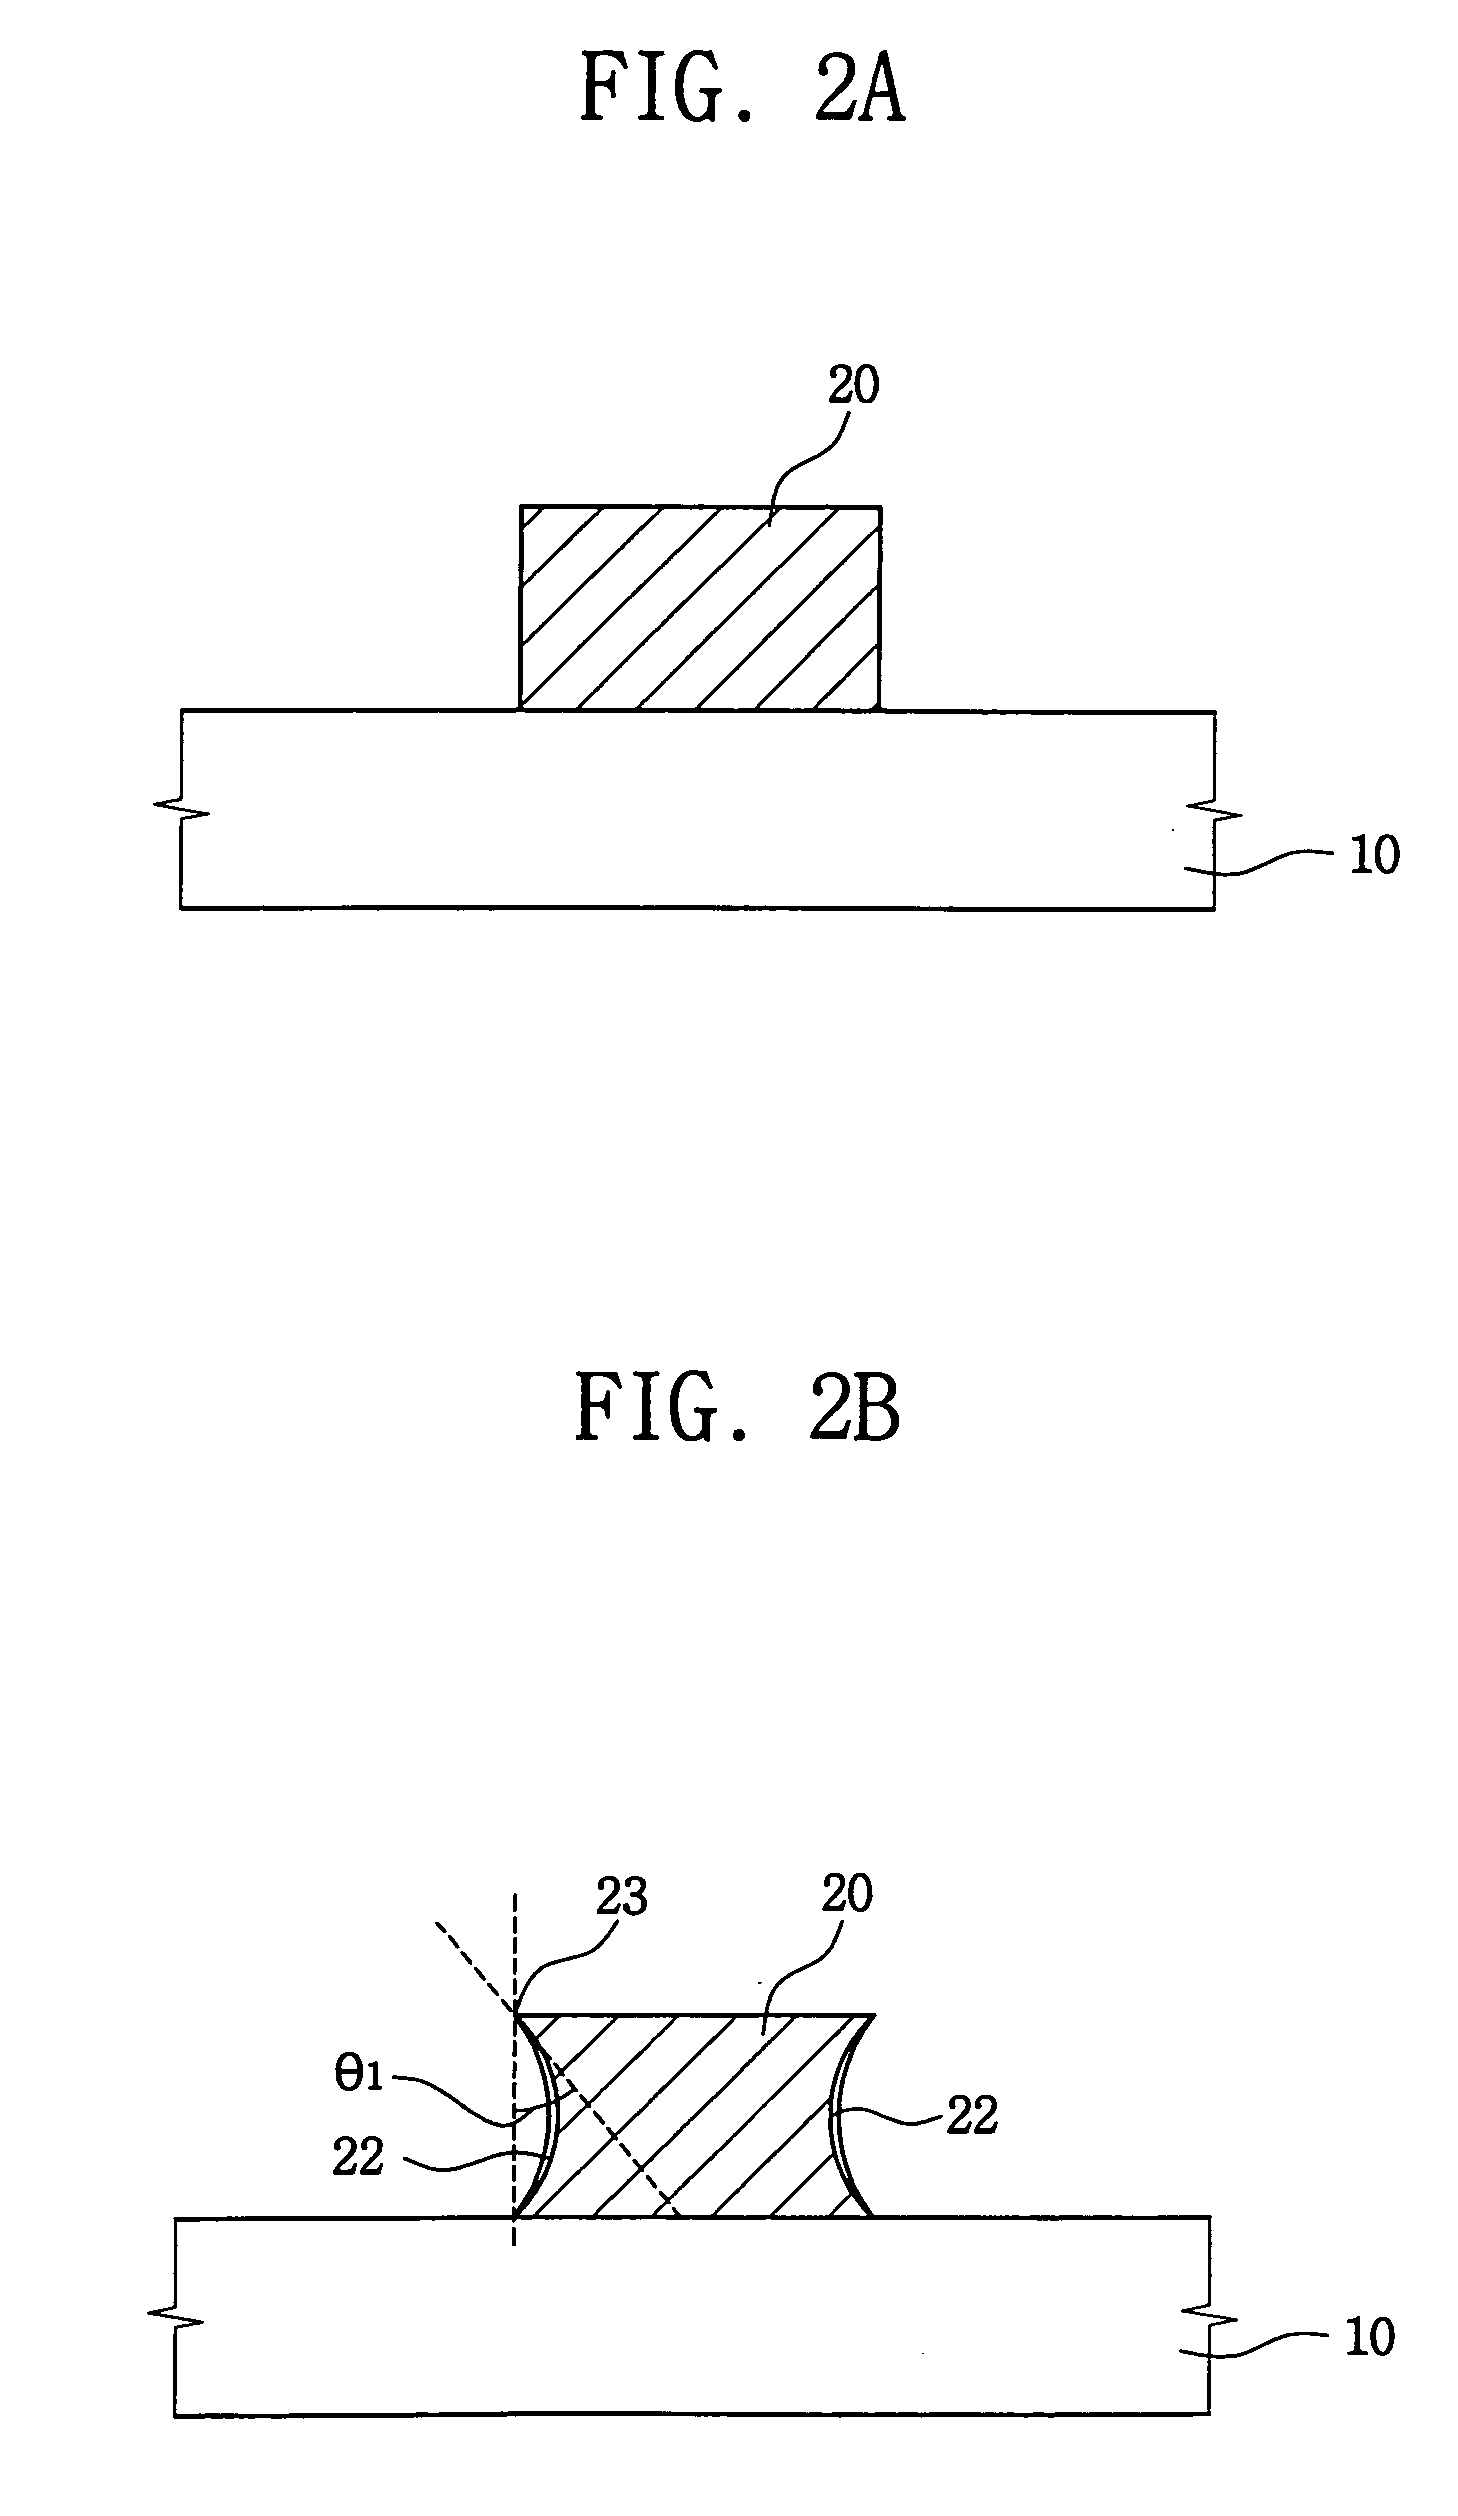 Method of manufacturing a floating gate and method of manufacturing a non-volatile semiconductor memory device comprising the same